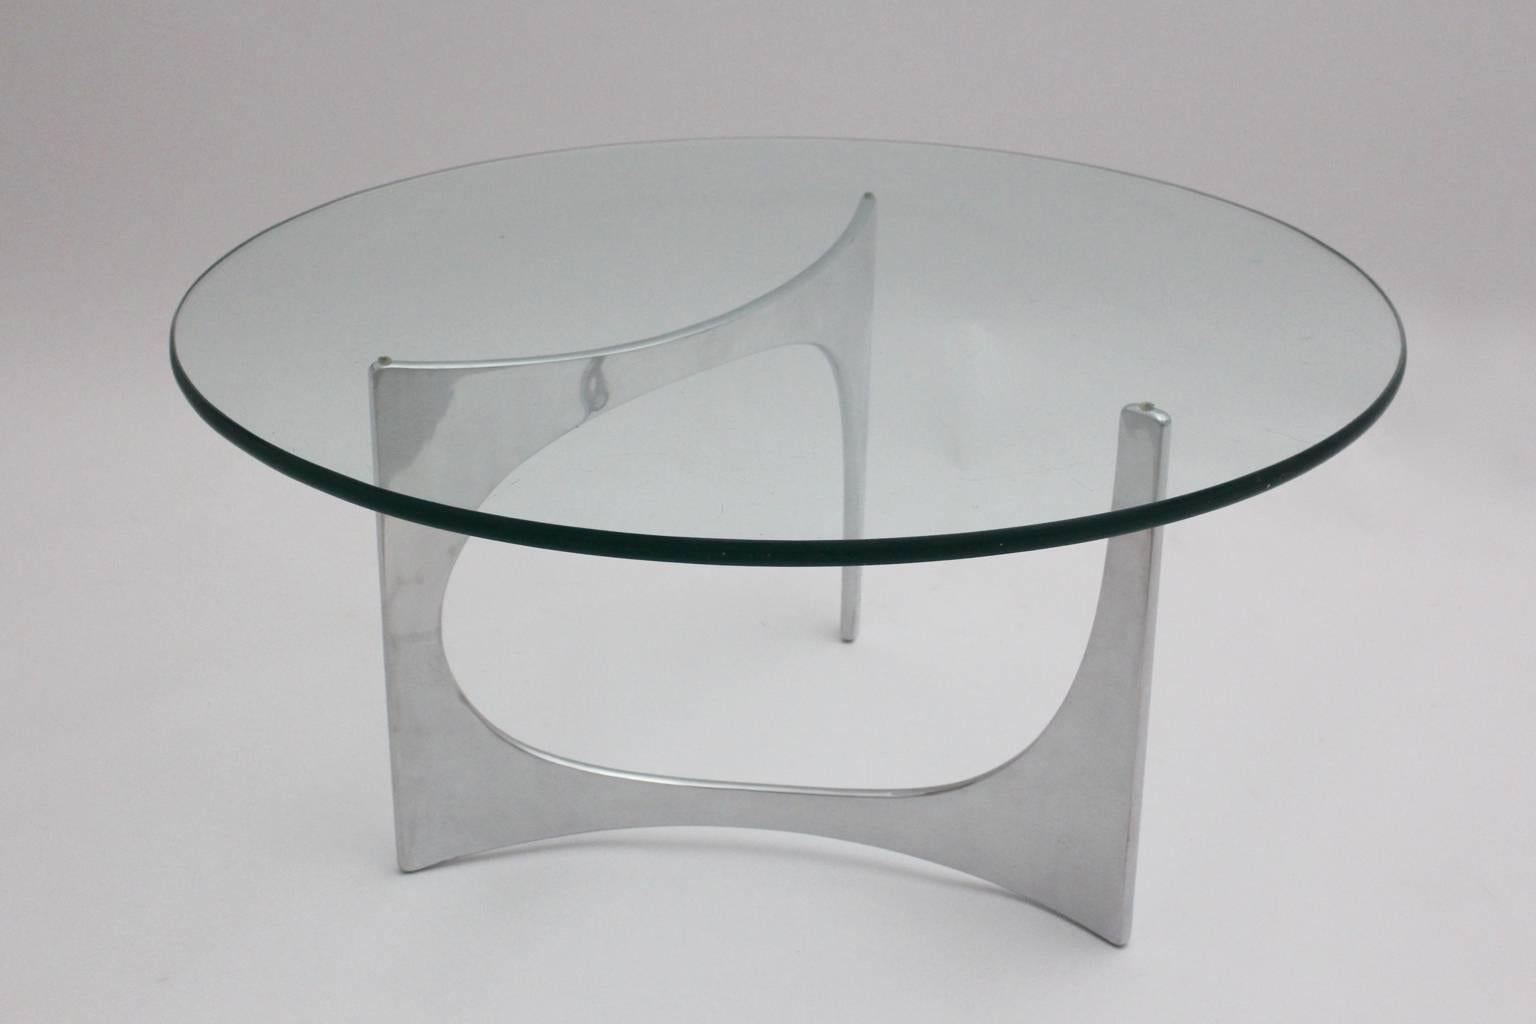 German Space Age Silver Aluminum Glass Vintage Coffee Table by Knut Hesterberg c 1970 For Sale